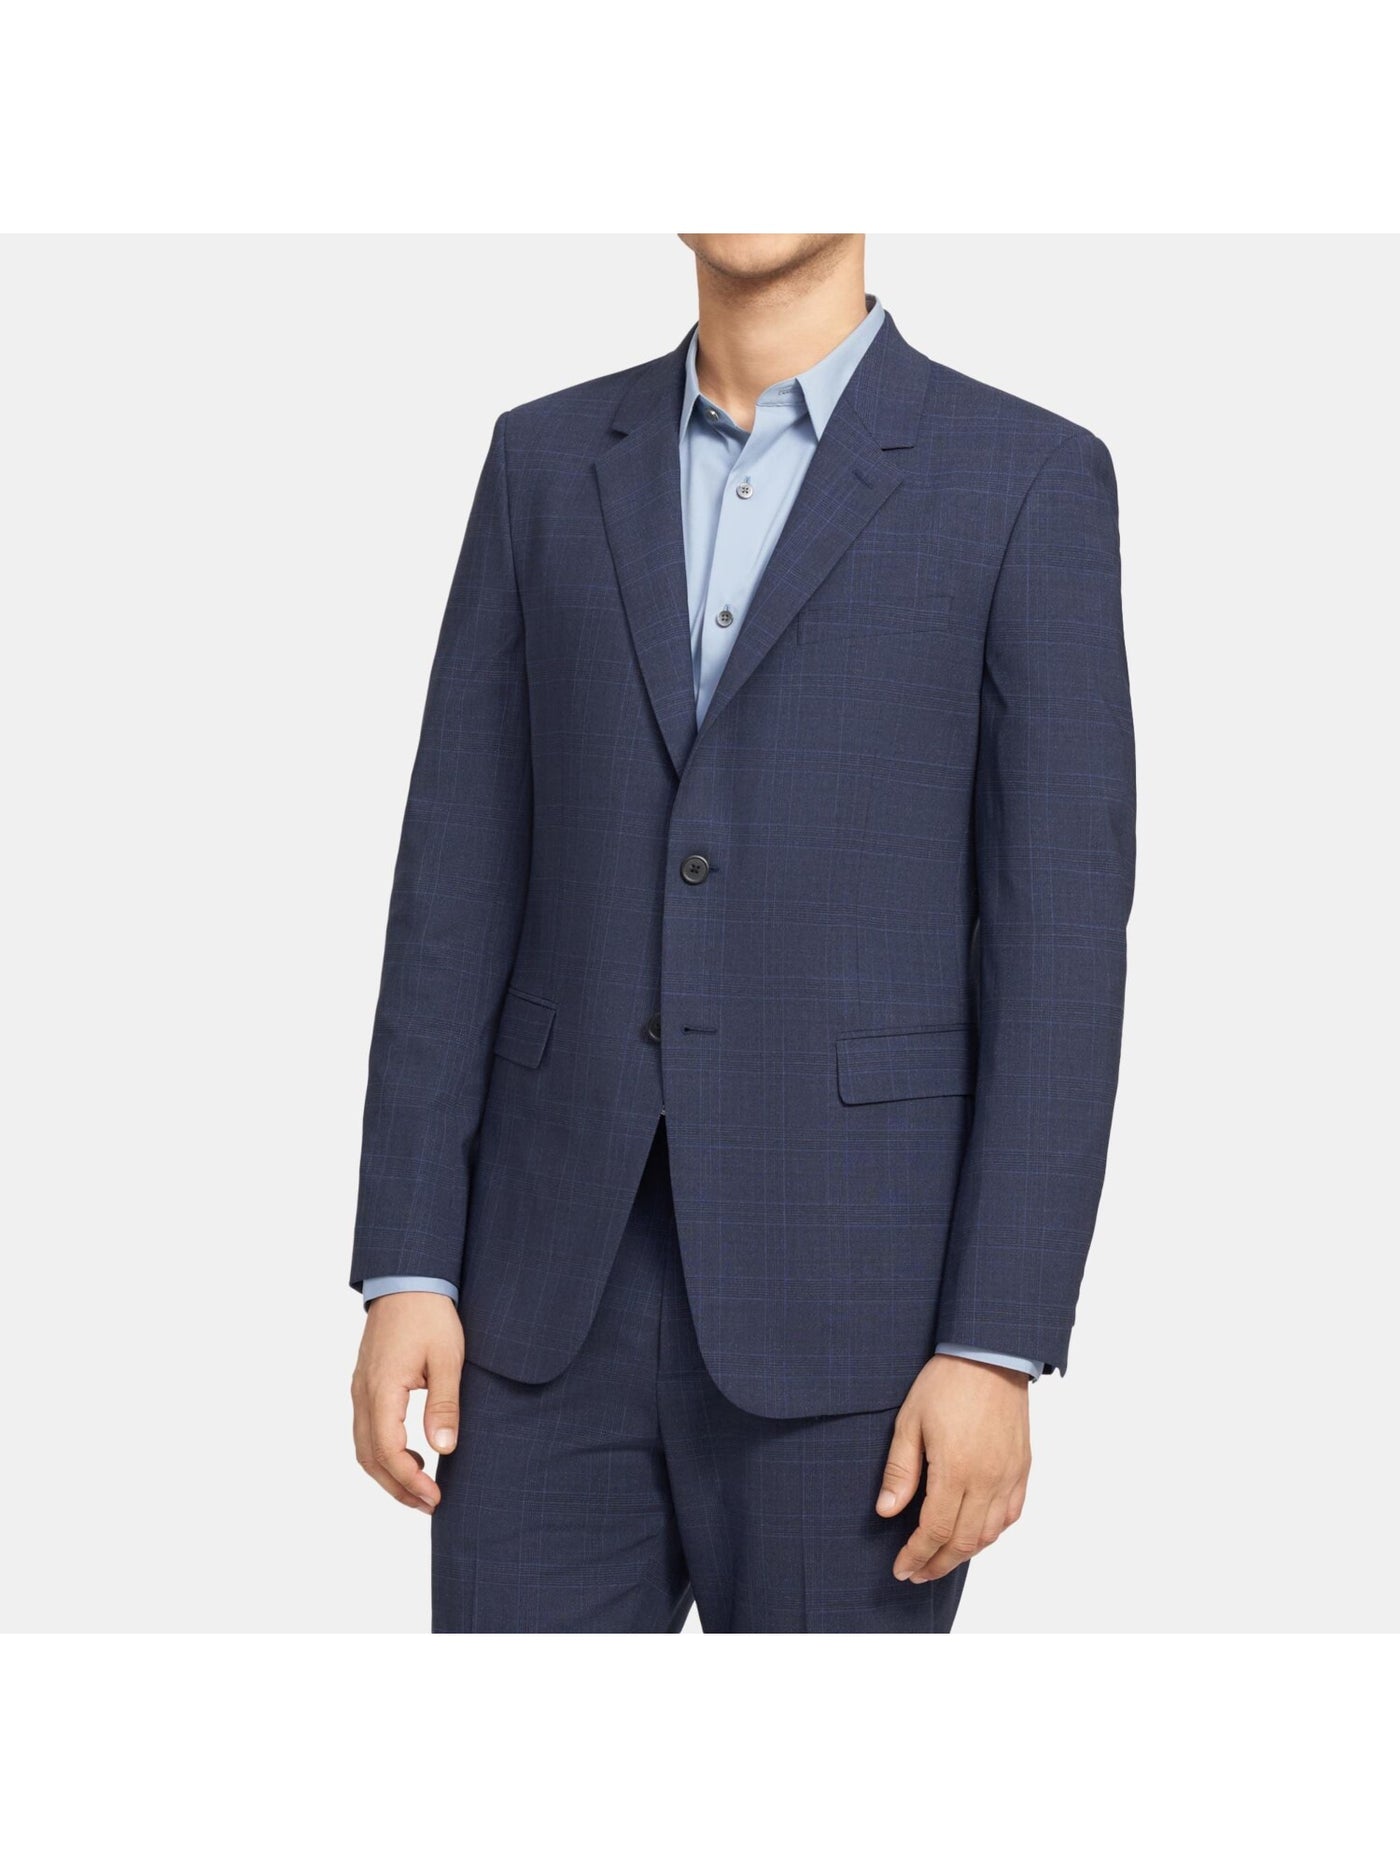 THEORY Mens Blue Single Breasted, Windowpane Plaid Extra Slim Fit Suit Separate Blazer Jacket 42L